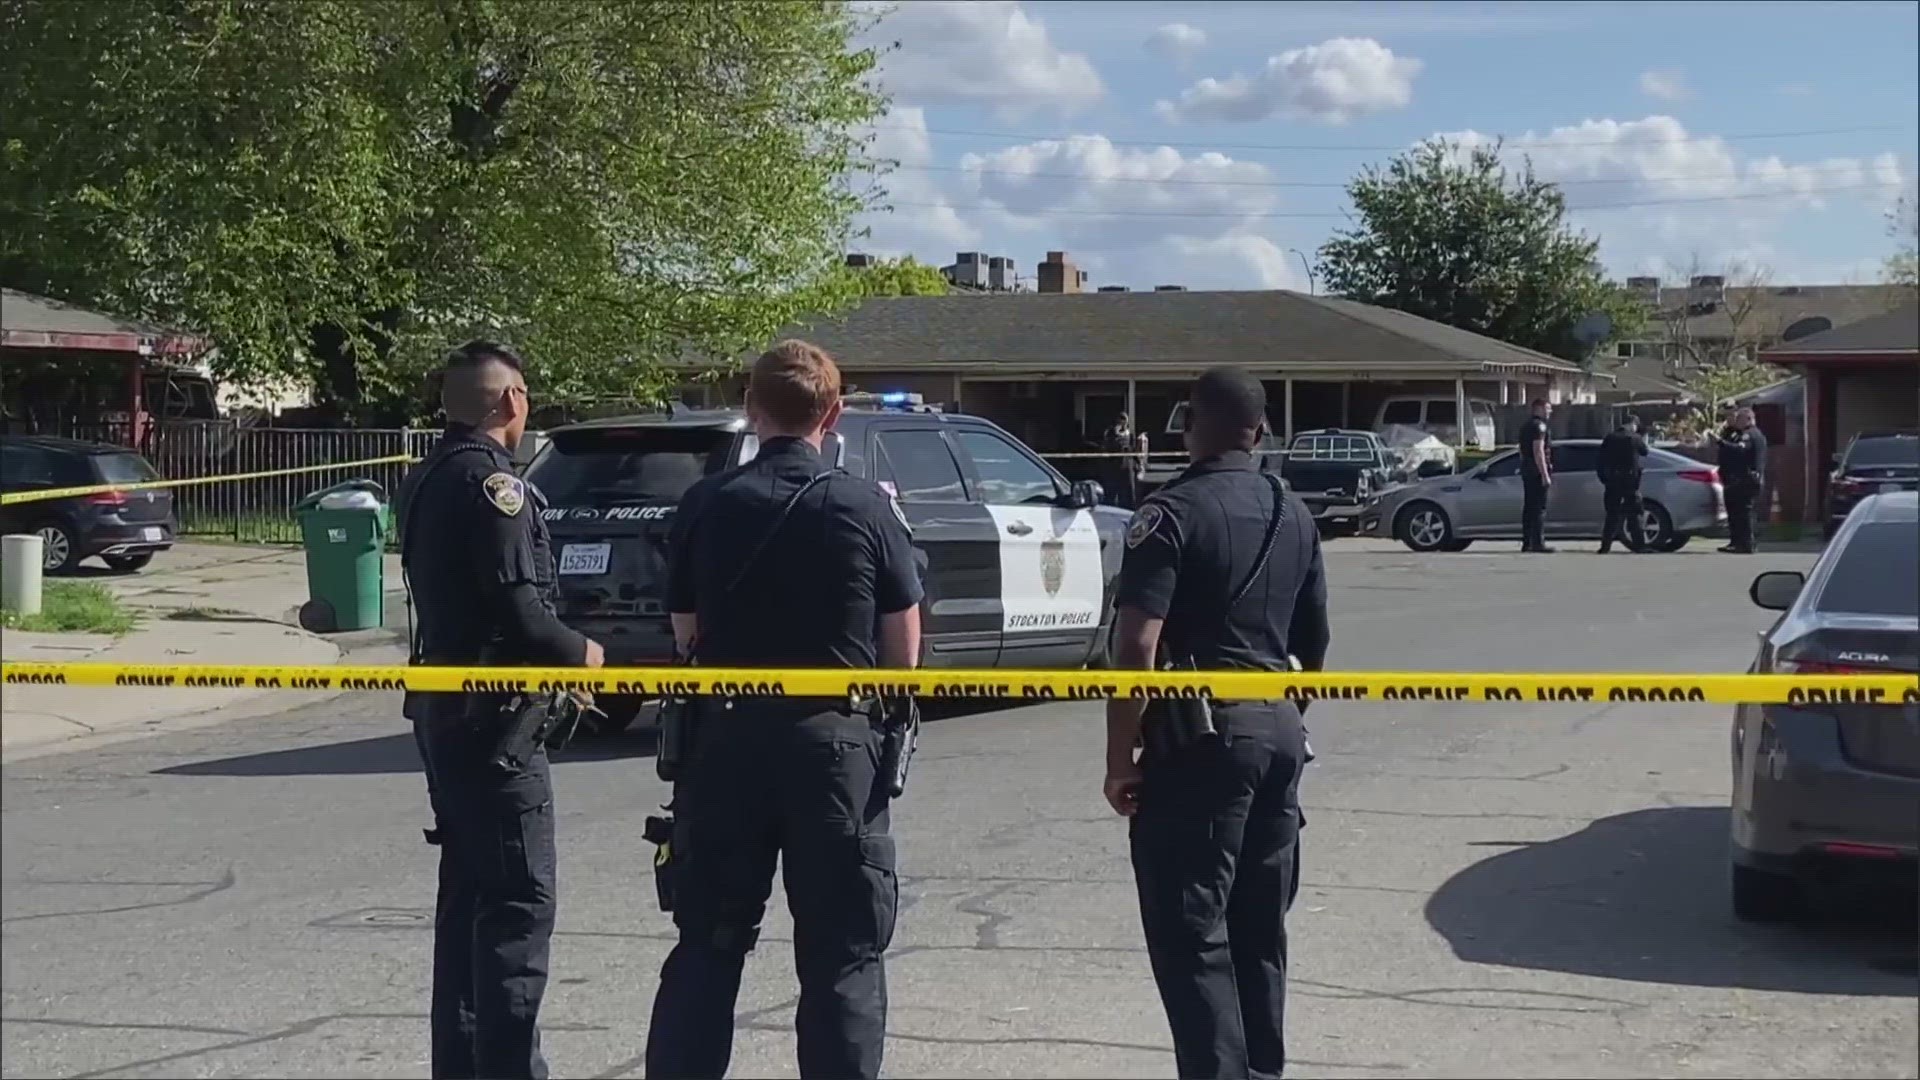 ​Police say multiple groups were shooting in the area, resulting in a 19-year-old man dying and a 53-year-old and two 19-year-old women getting hurt.